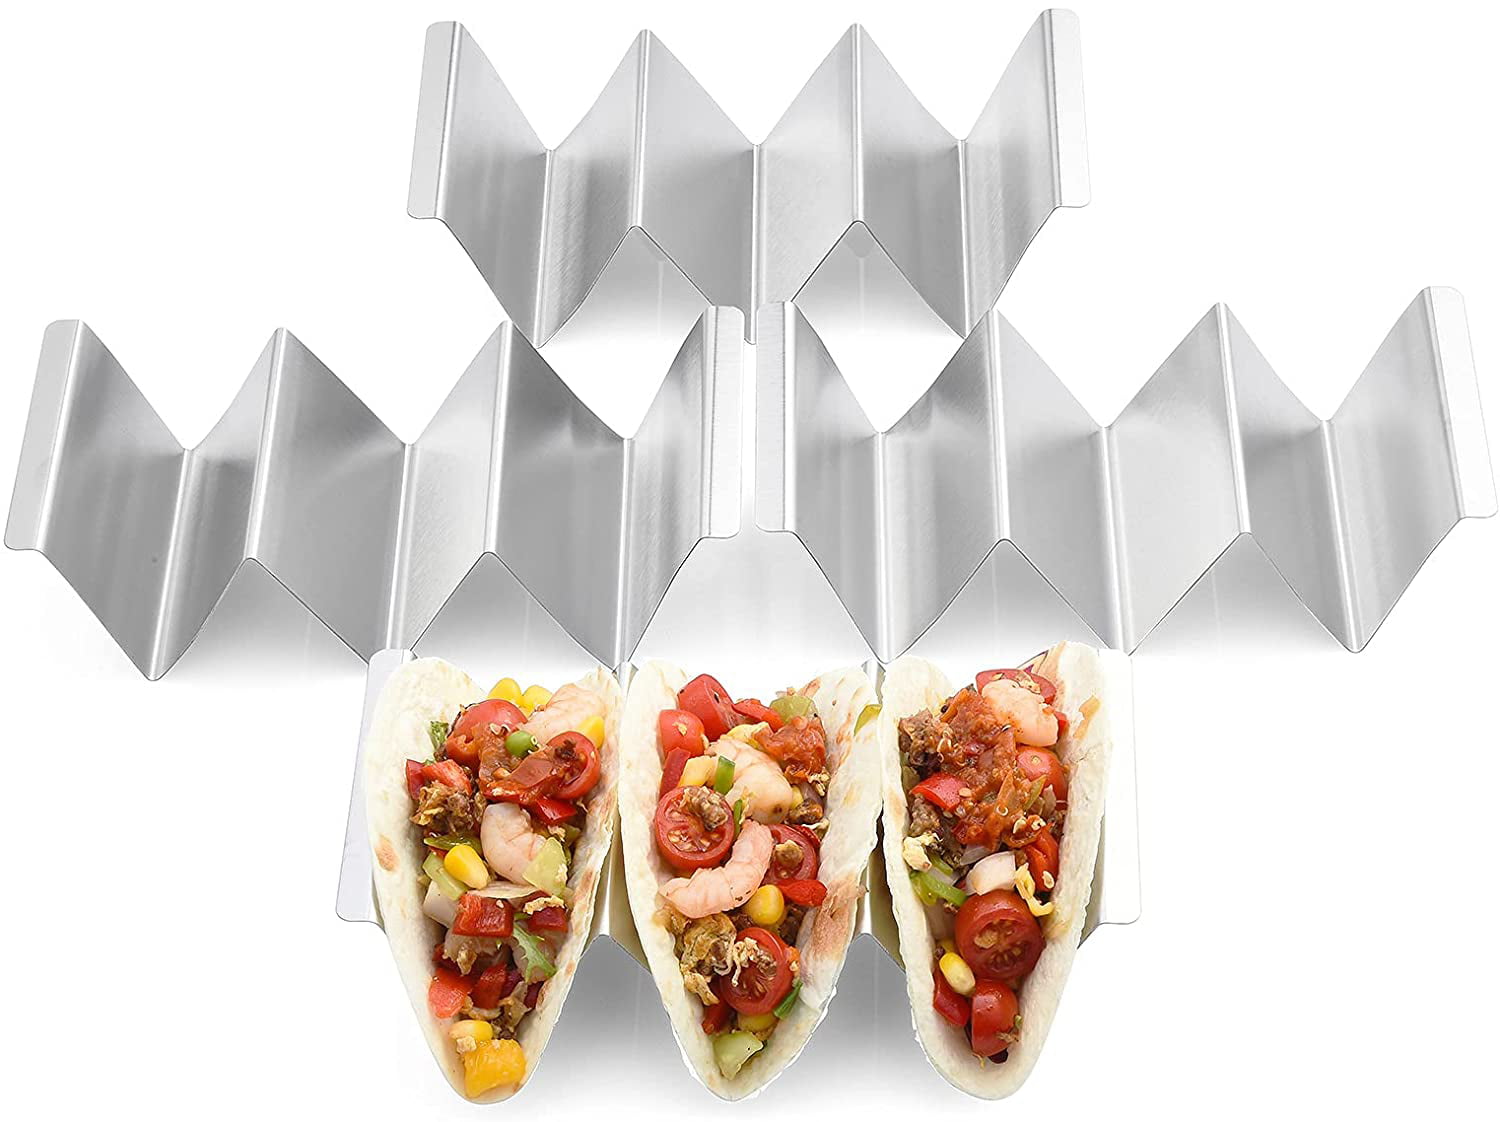 Taco Holder Stainless Steel Set of 3 Taco Stand Holds Up to 2 Tacos Each Dishwasher & Oven Safe 